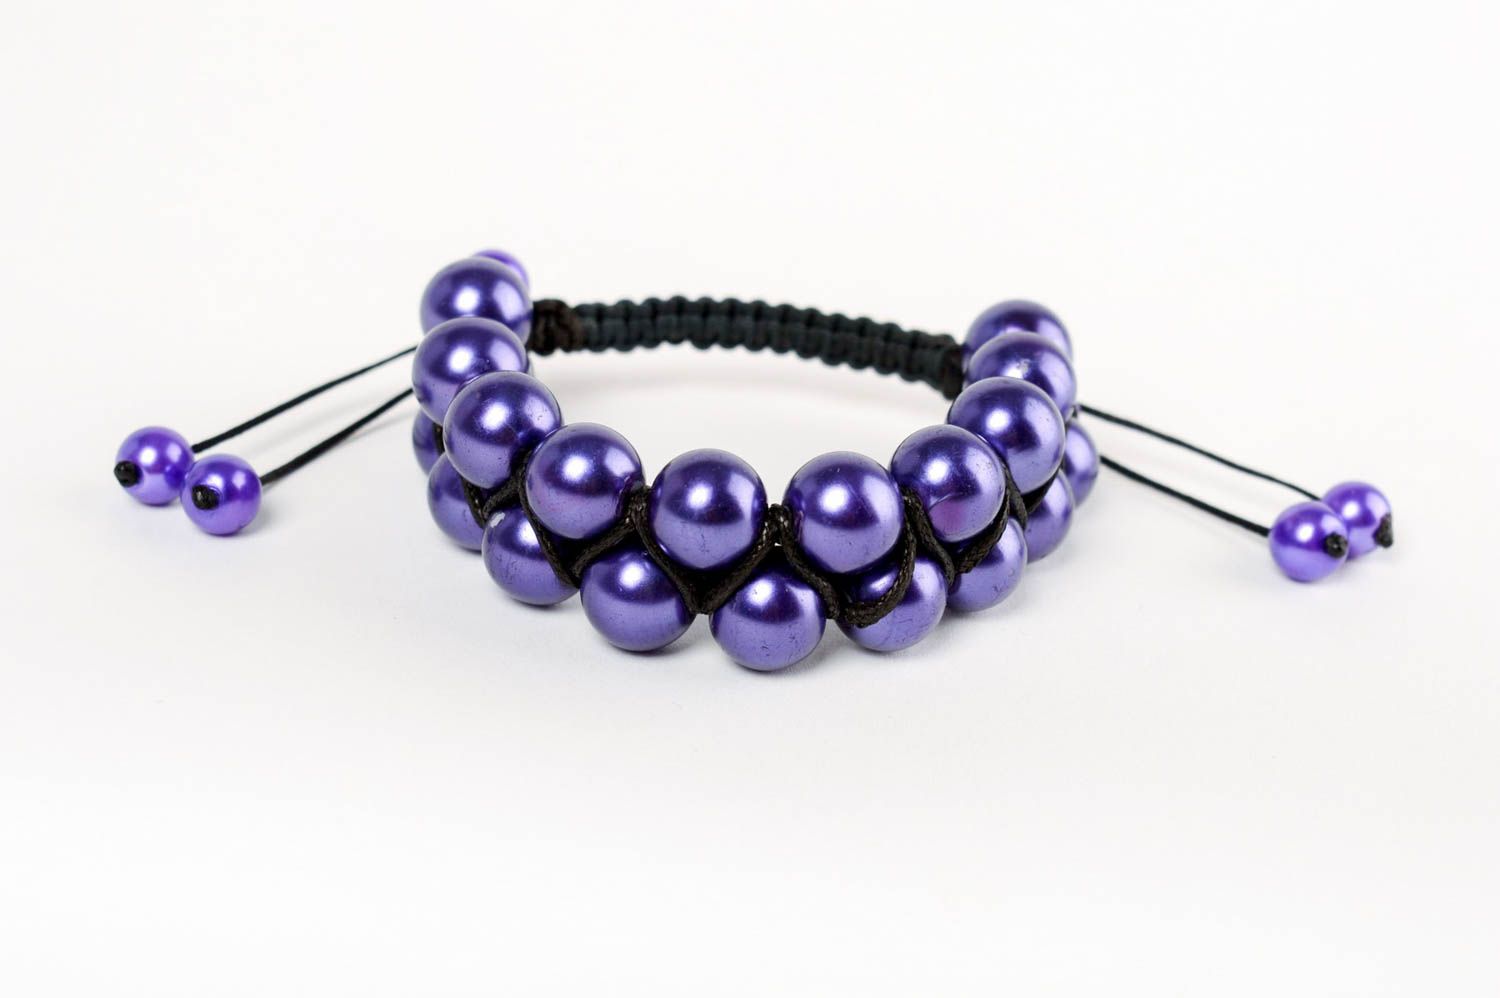 Handmade purple bracelet made of ceramic pearls and lace using macrame technique photo 2